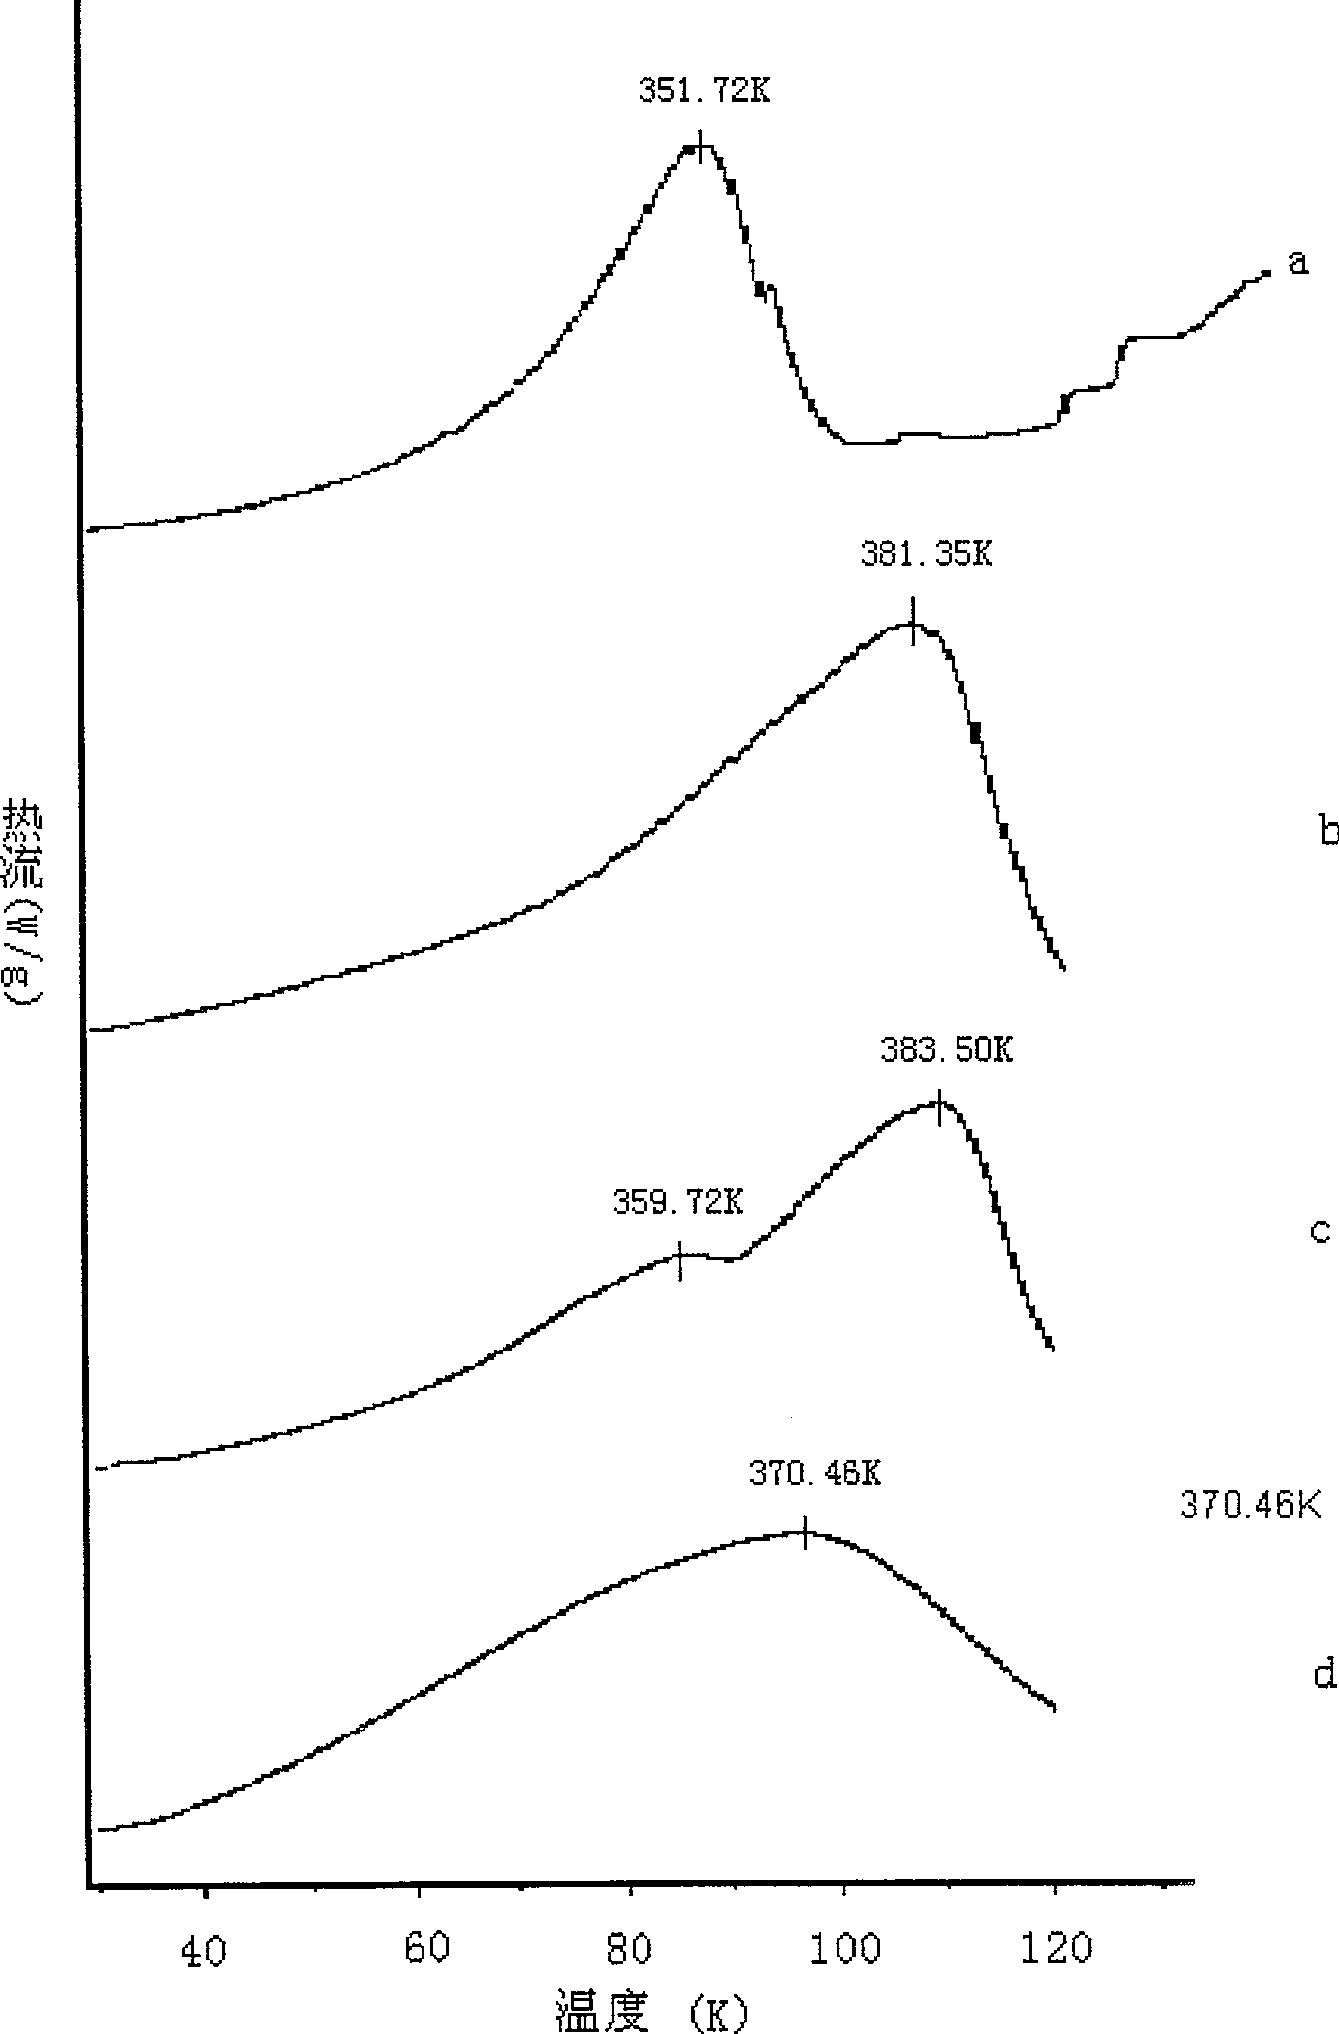 Clathrate of chloramine phosphate and cyclodextrin or derivative thereof and the preparation process thereof